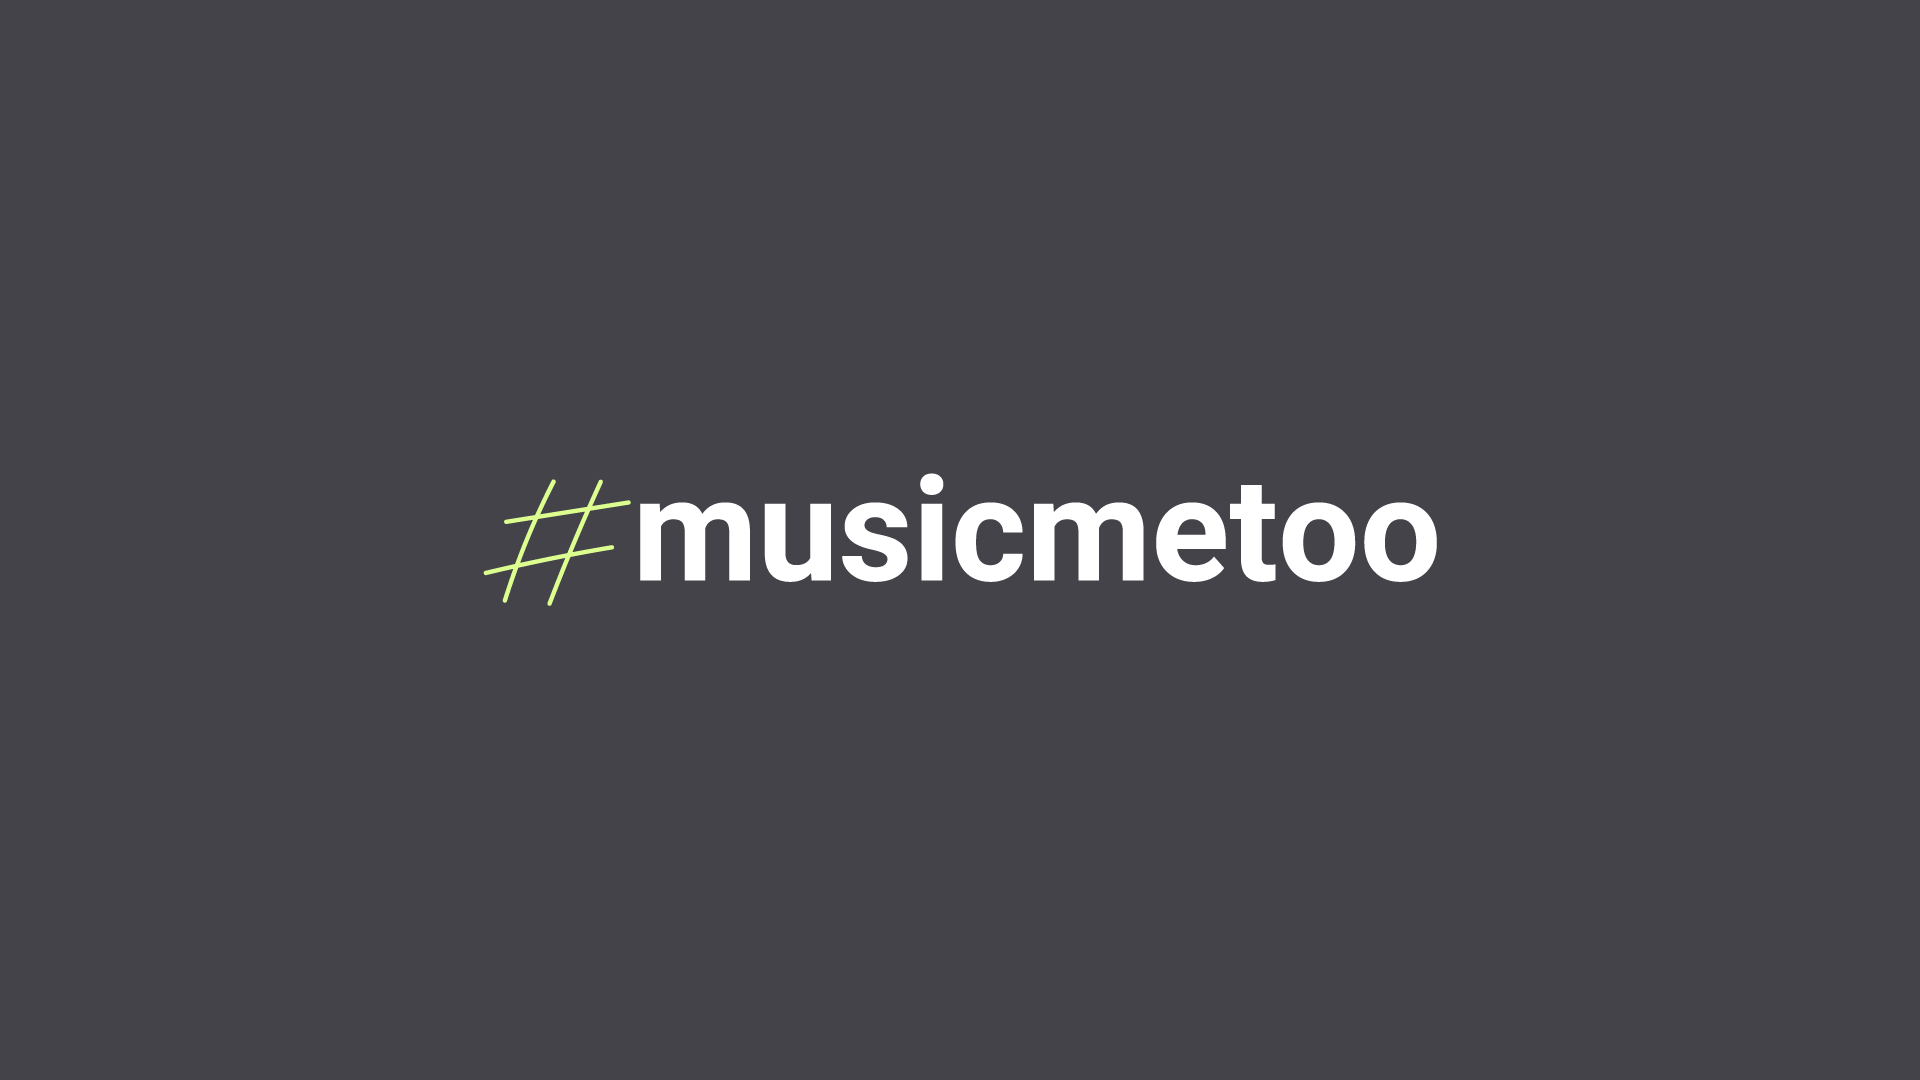 Platform Wants to Expose Violence and Abuse of Power in Music Business post image